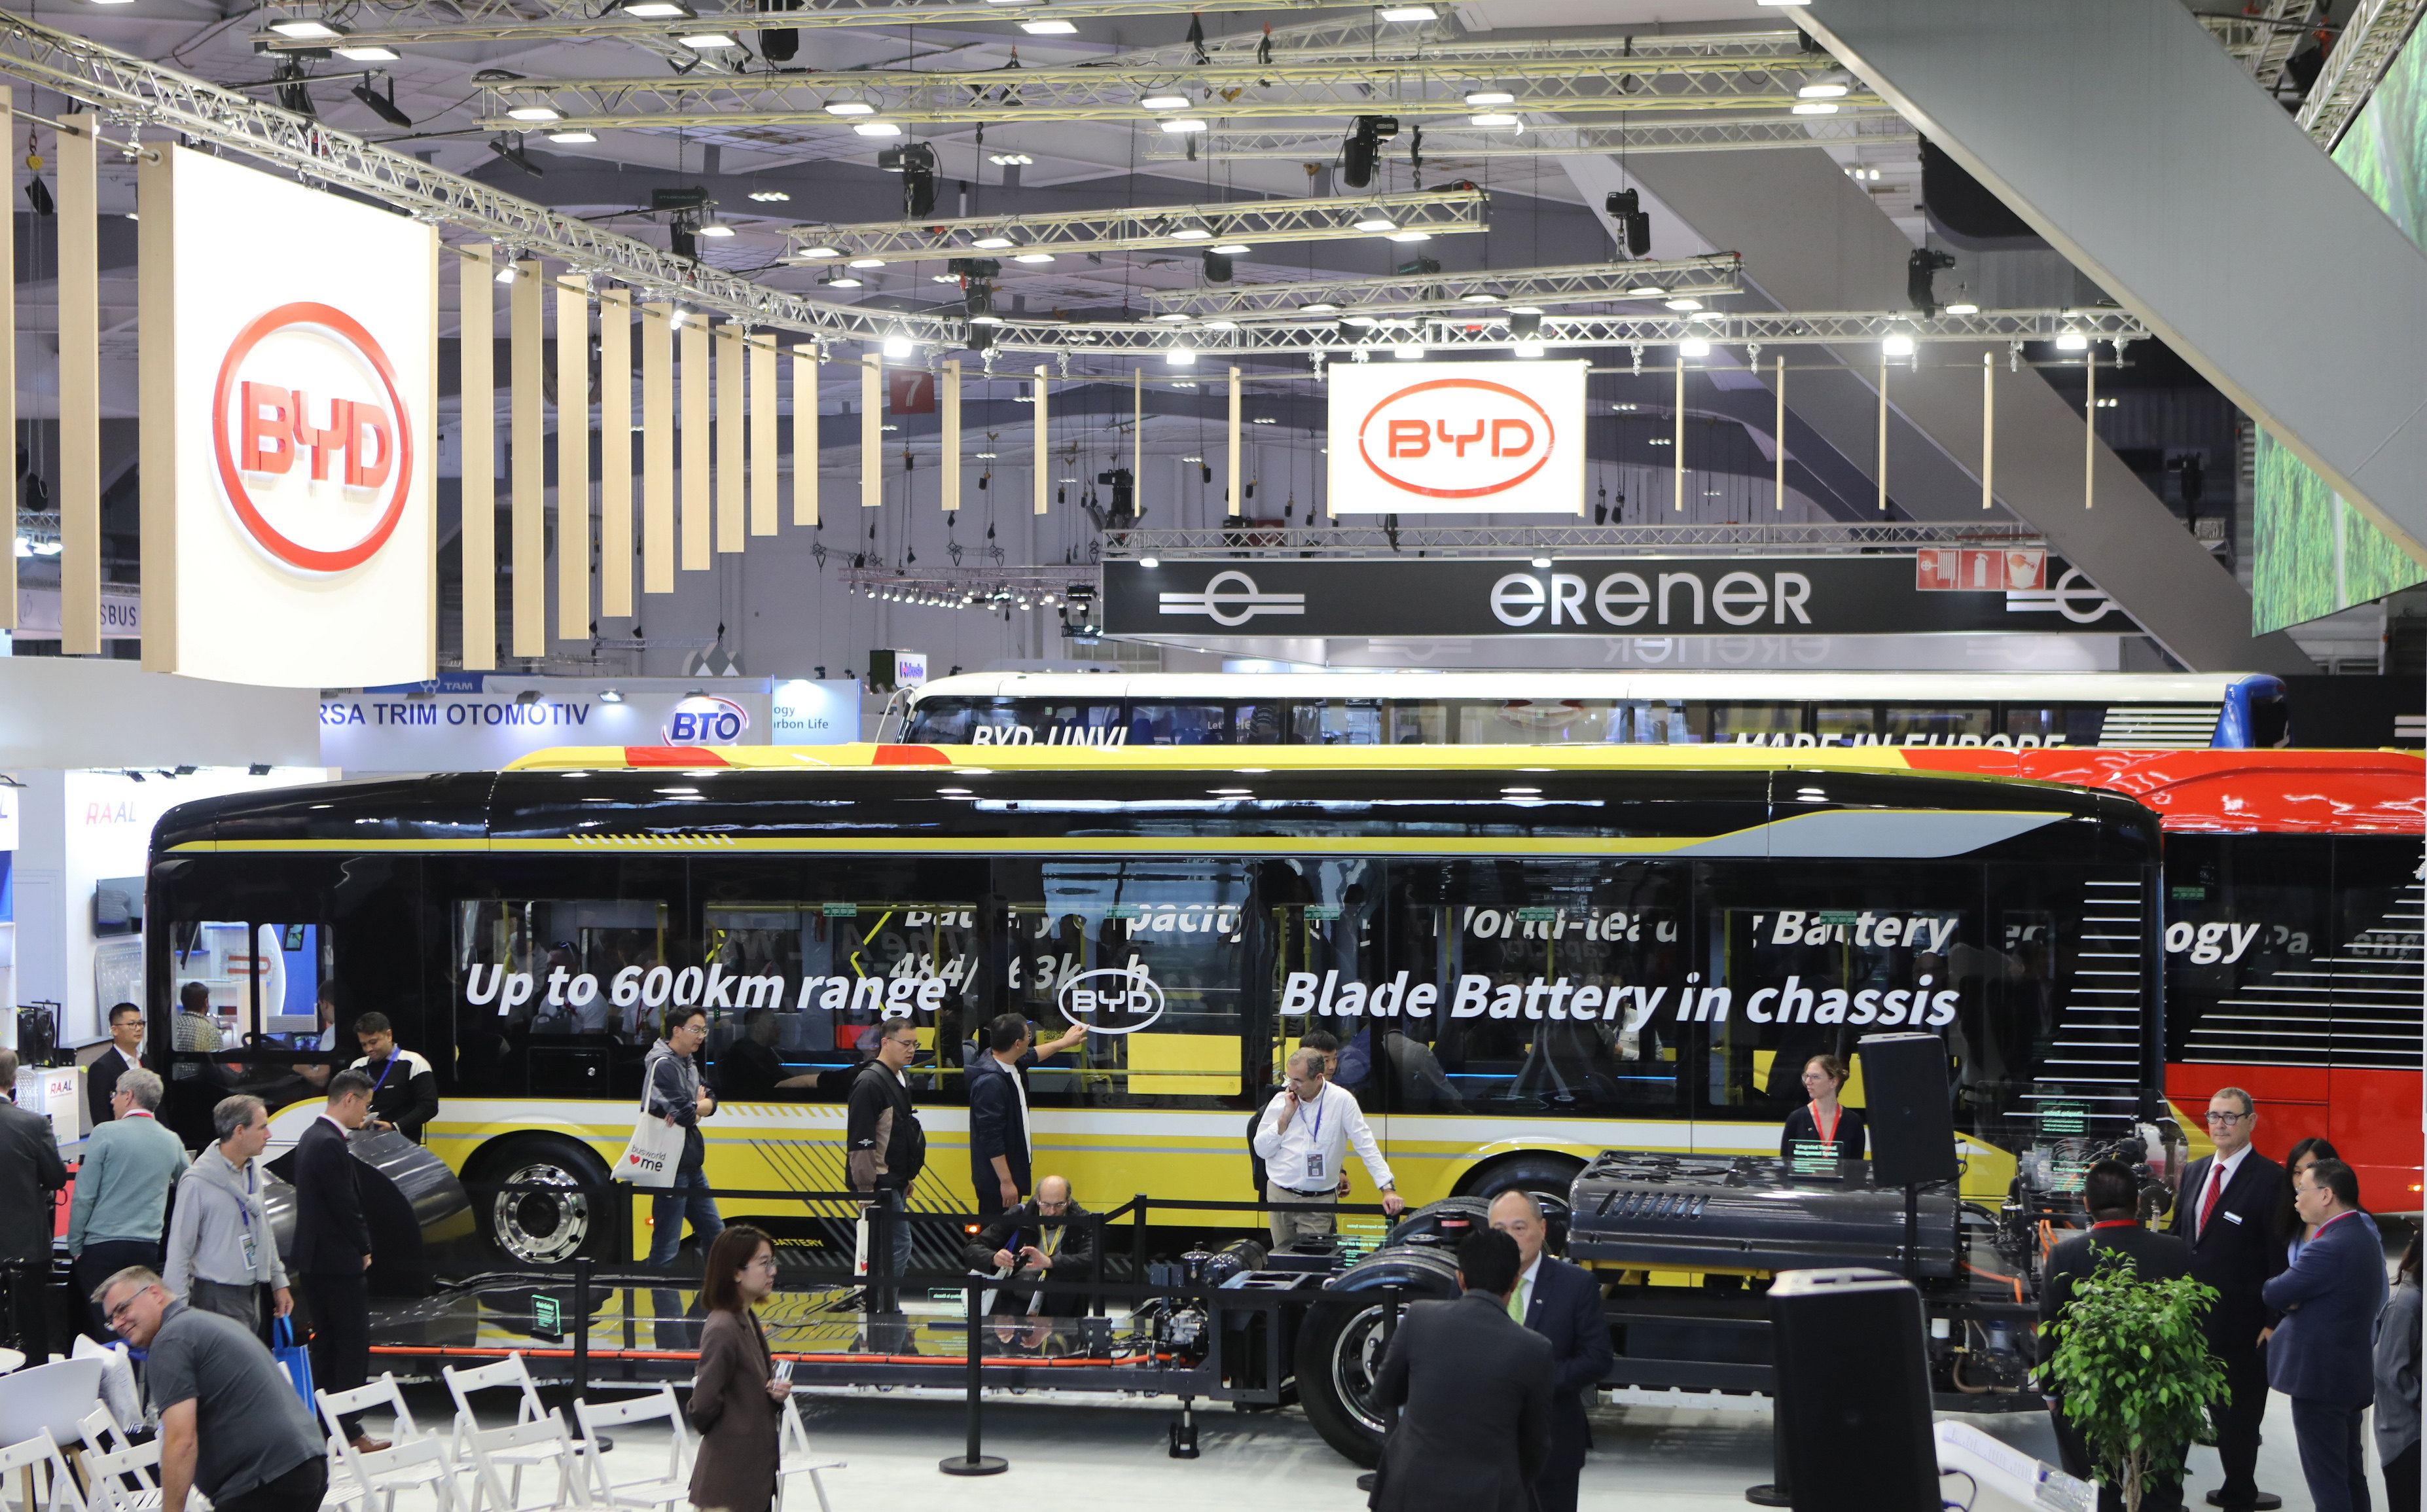 BYD buses are displayed at the 26th edition of Busworld Europe in Brussels, Belgium, on October 7. Photo: Xinhua